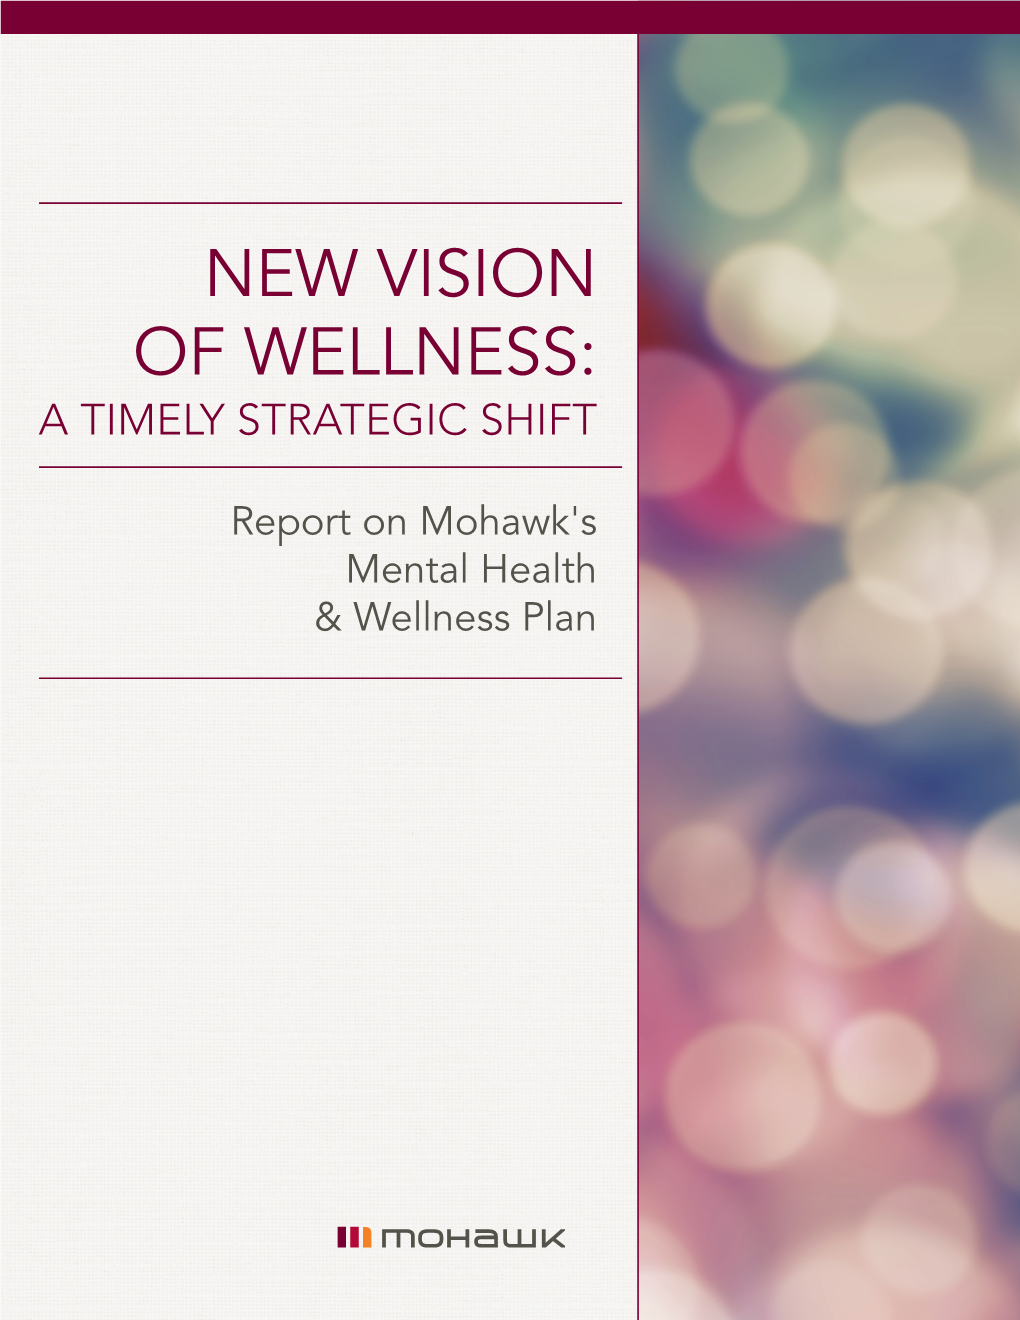 New Vision of Wellness: a Timely Strategic Shift